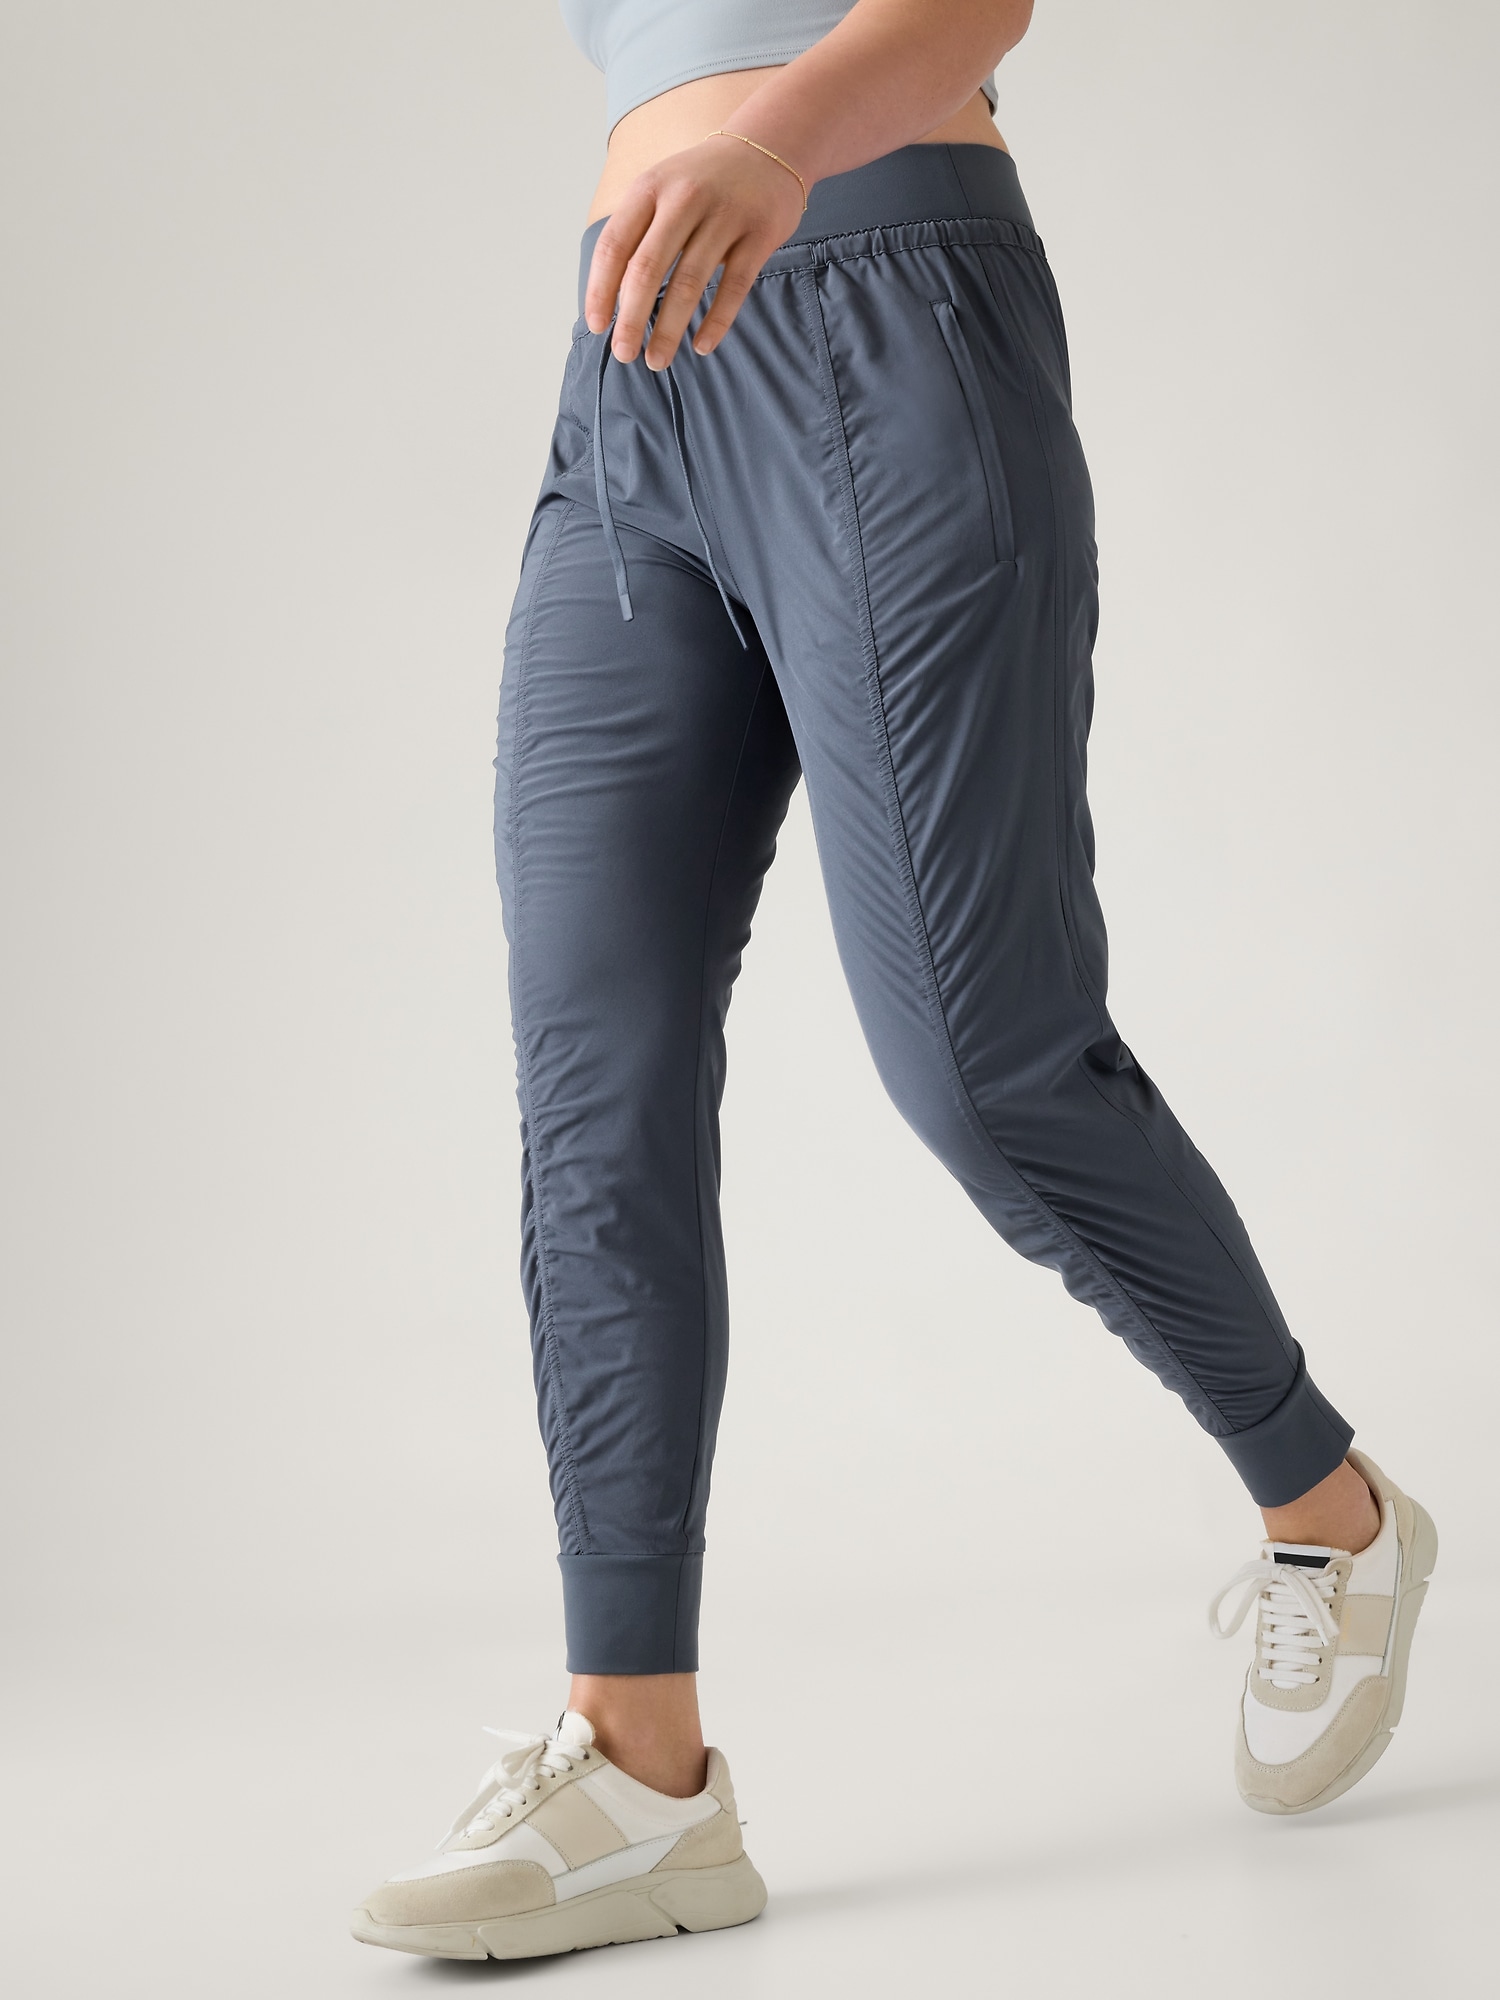 Runderful- keep, size down, return ? See comments for details! : r/lululemon